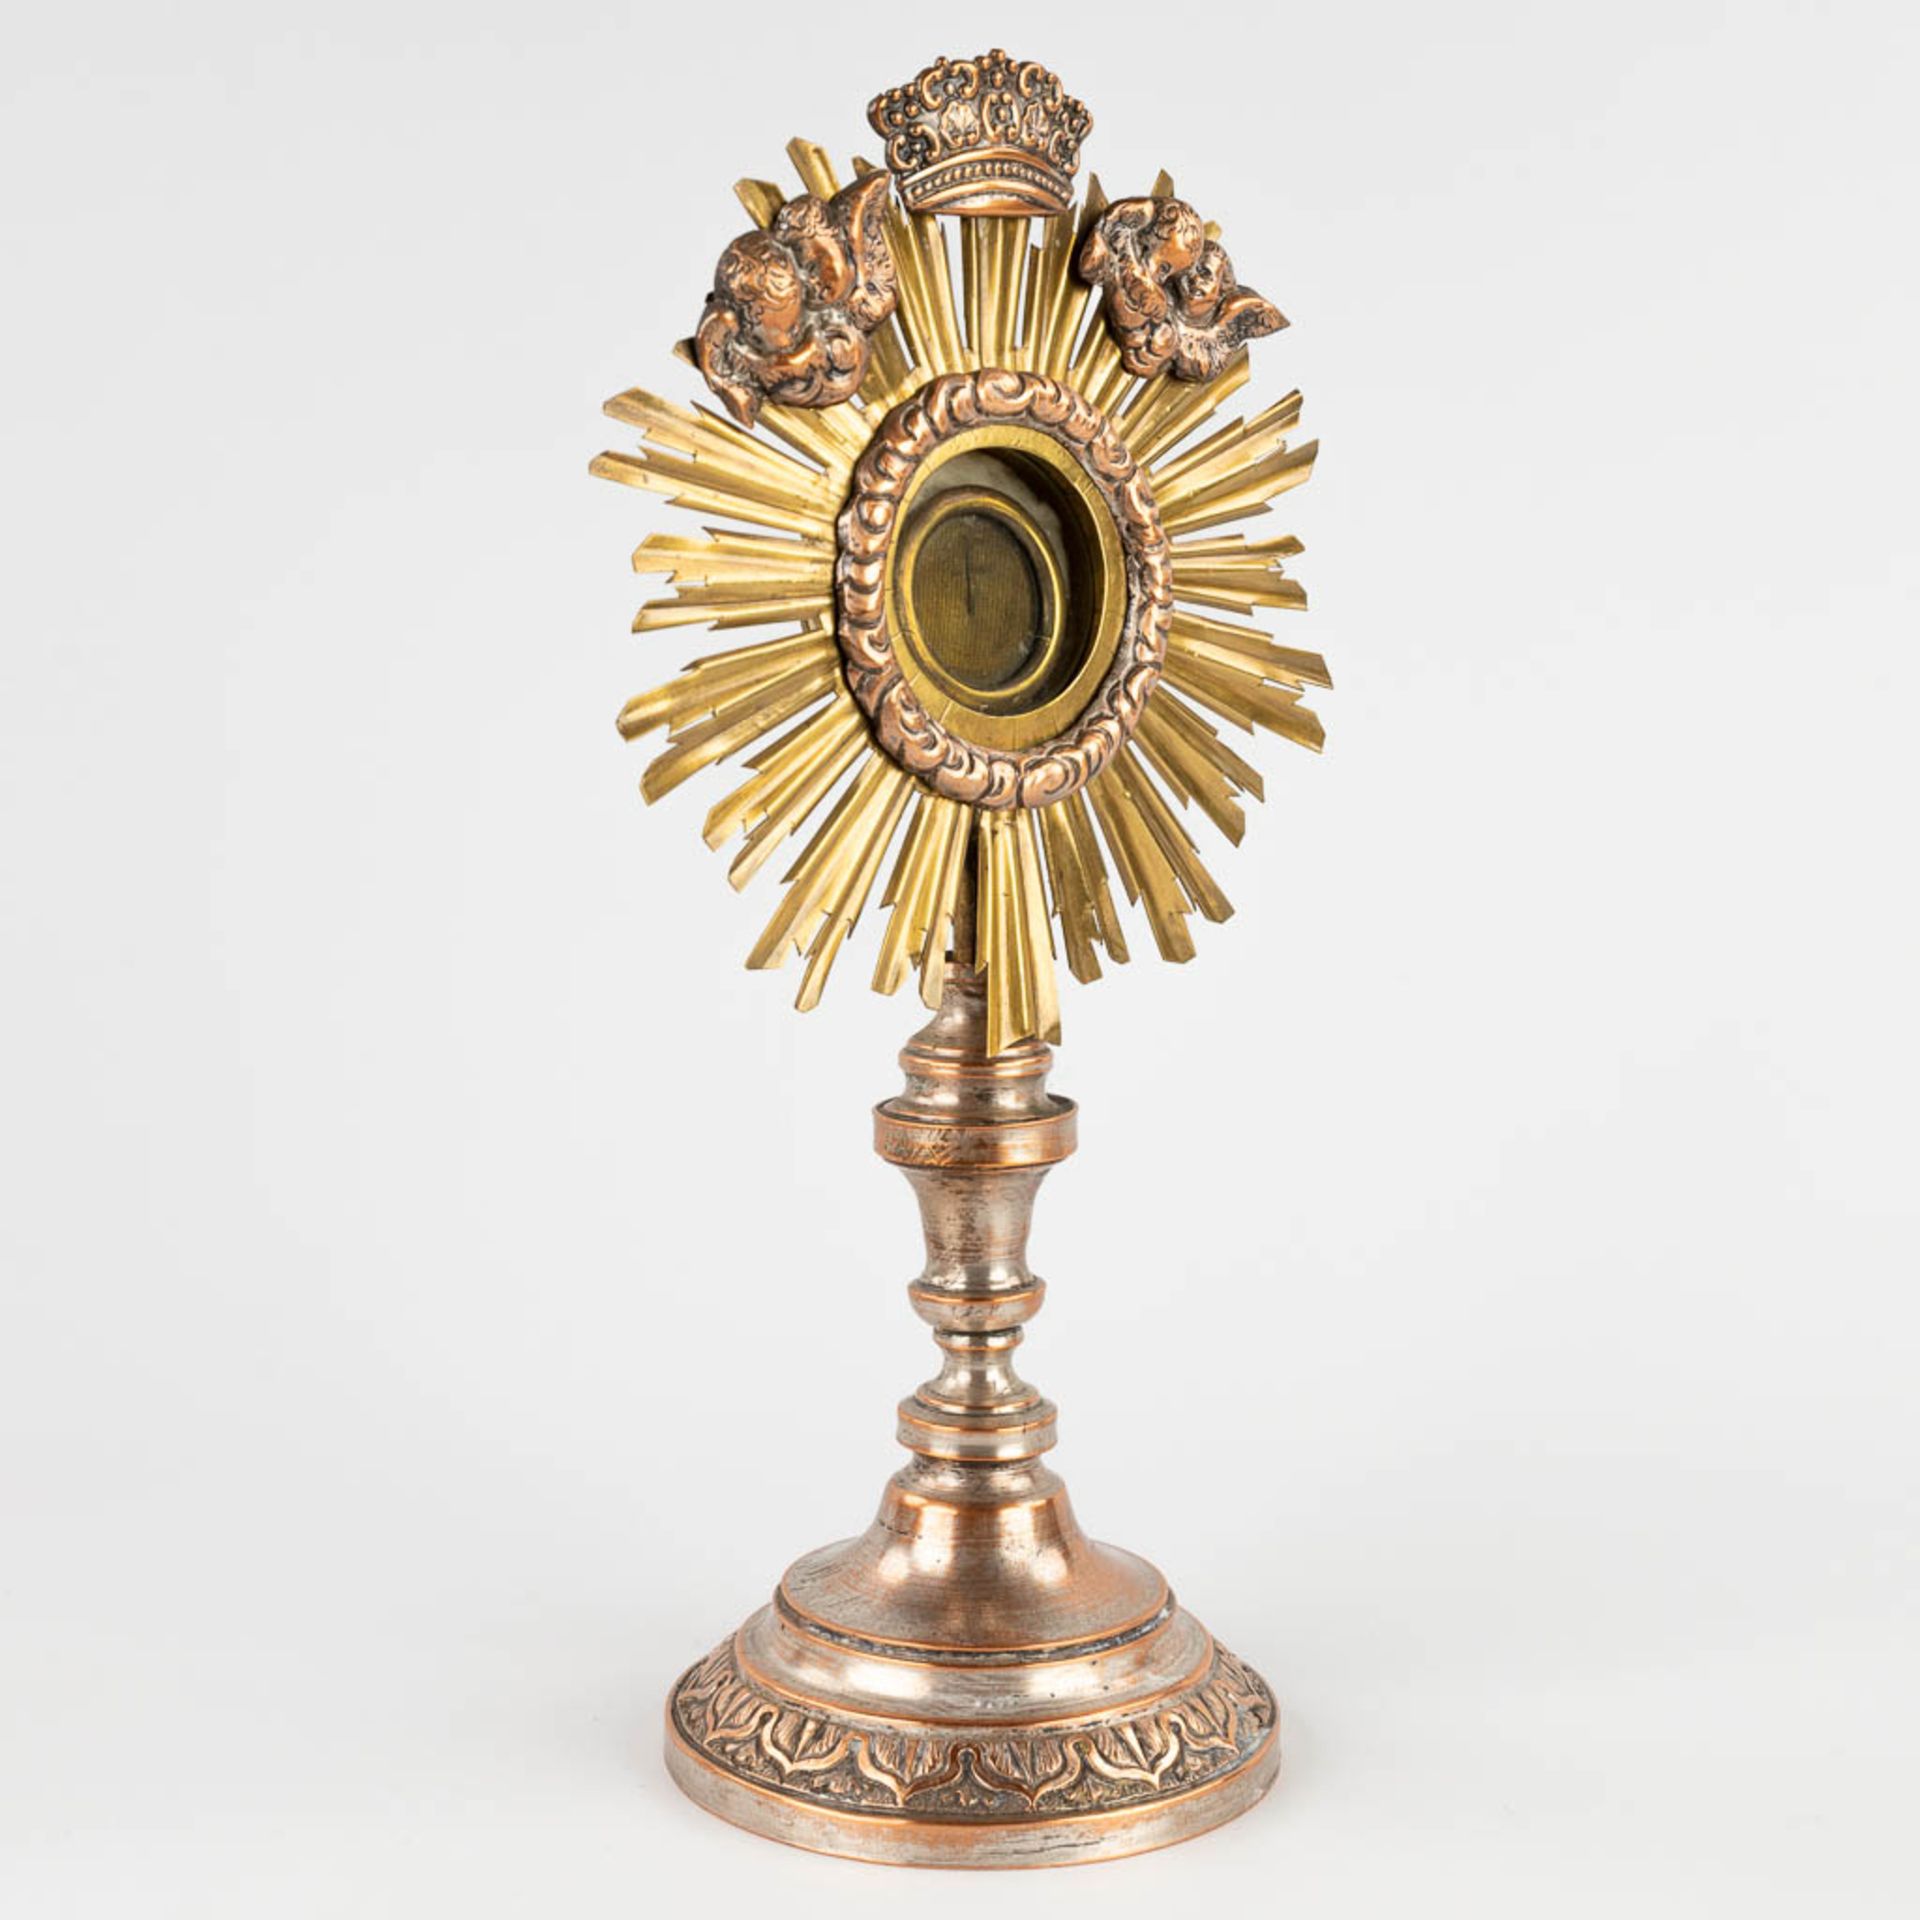 A small sunburst monstrance with a relic of the true cross. (D:11 x W:16 x H:29 cm) - Image 3 of 12